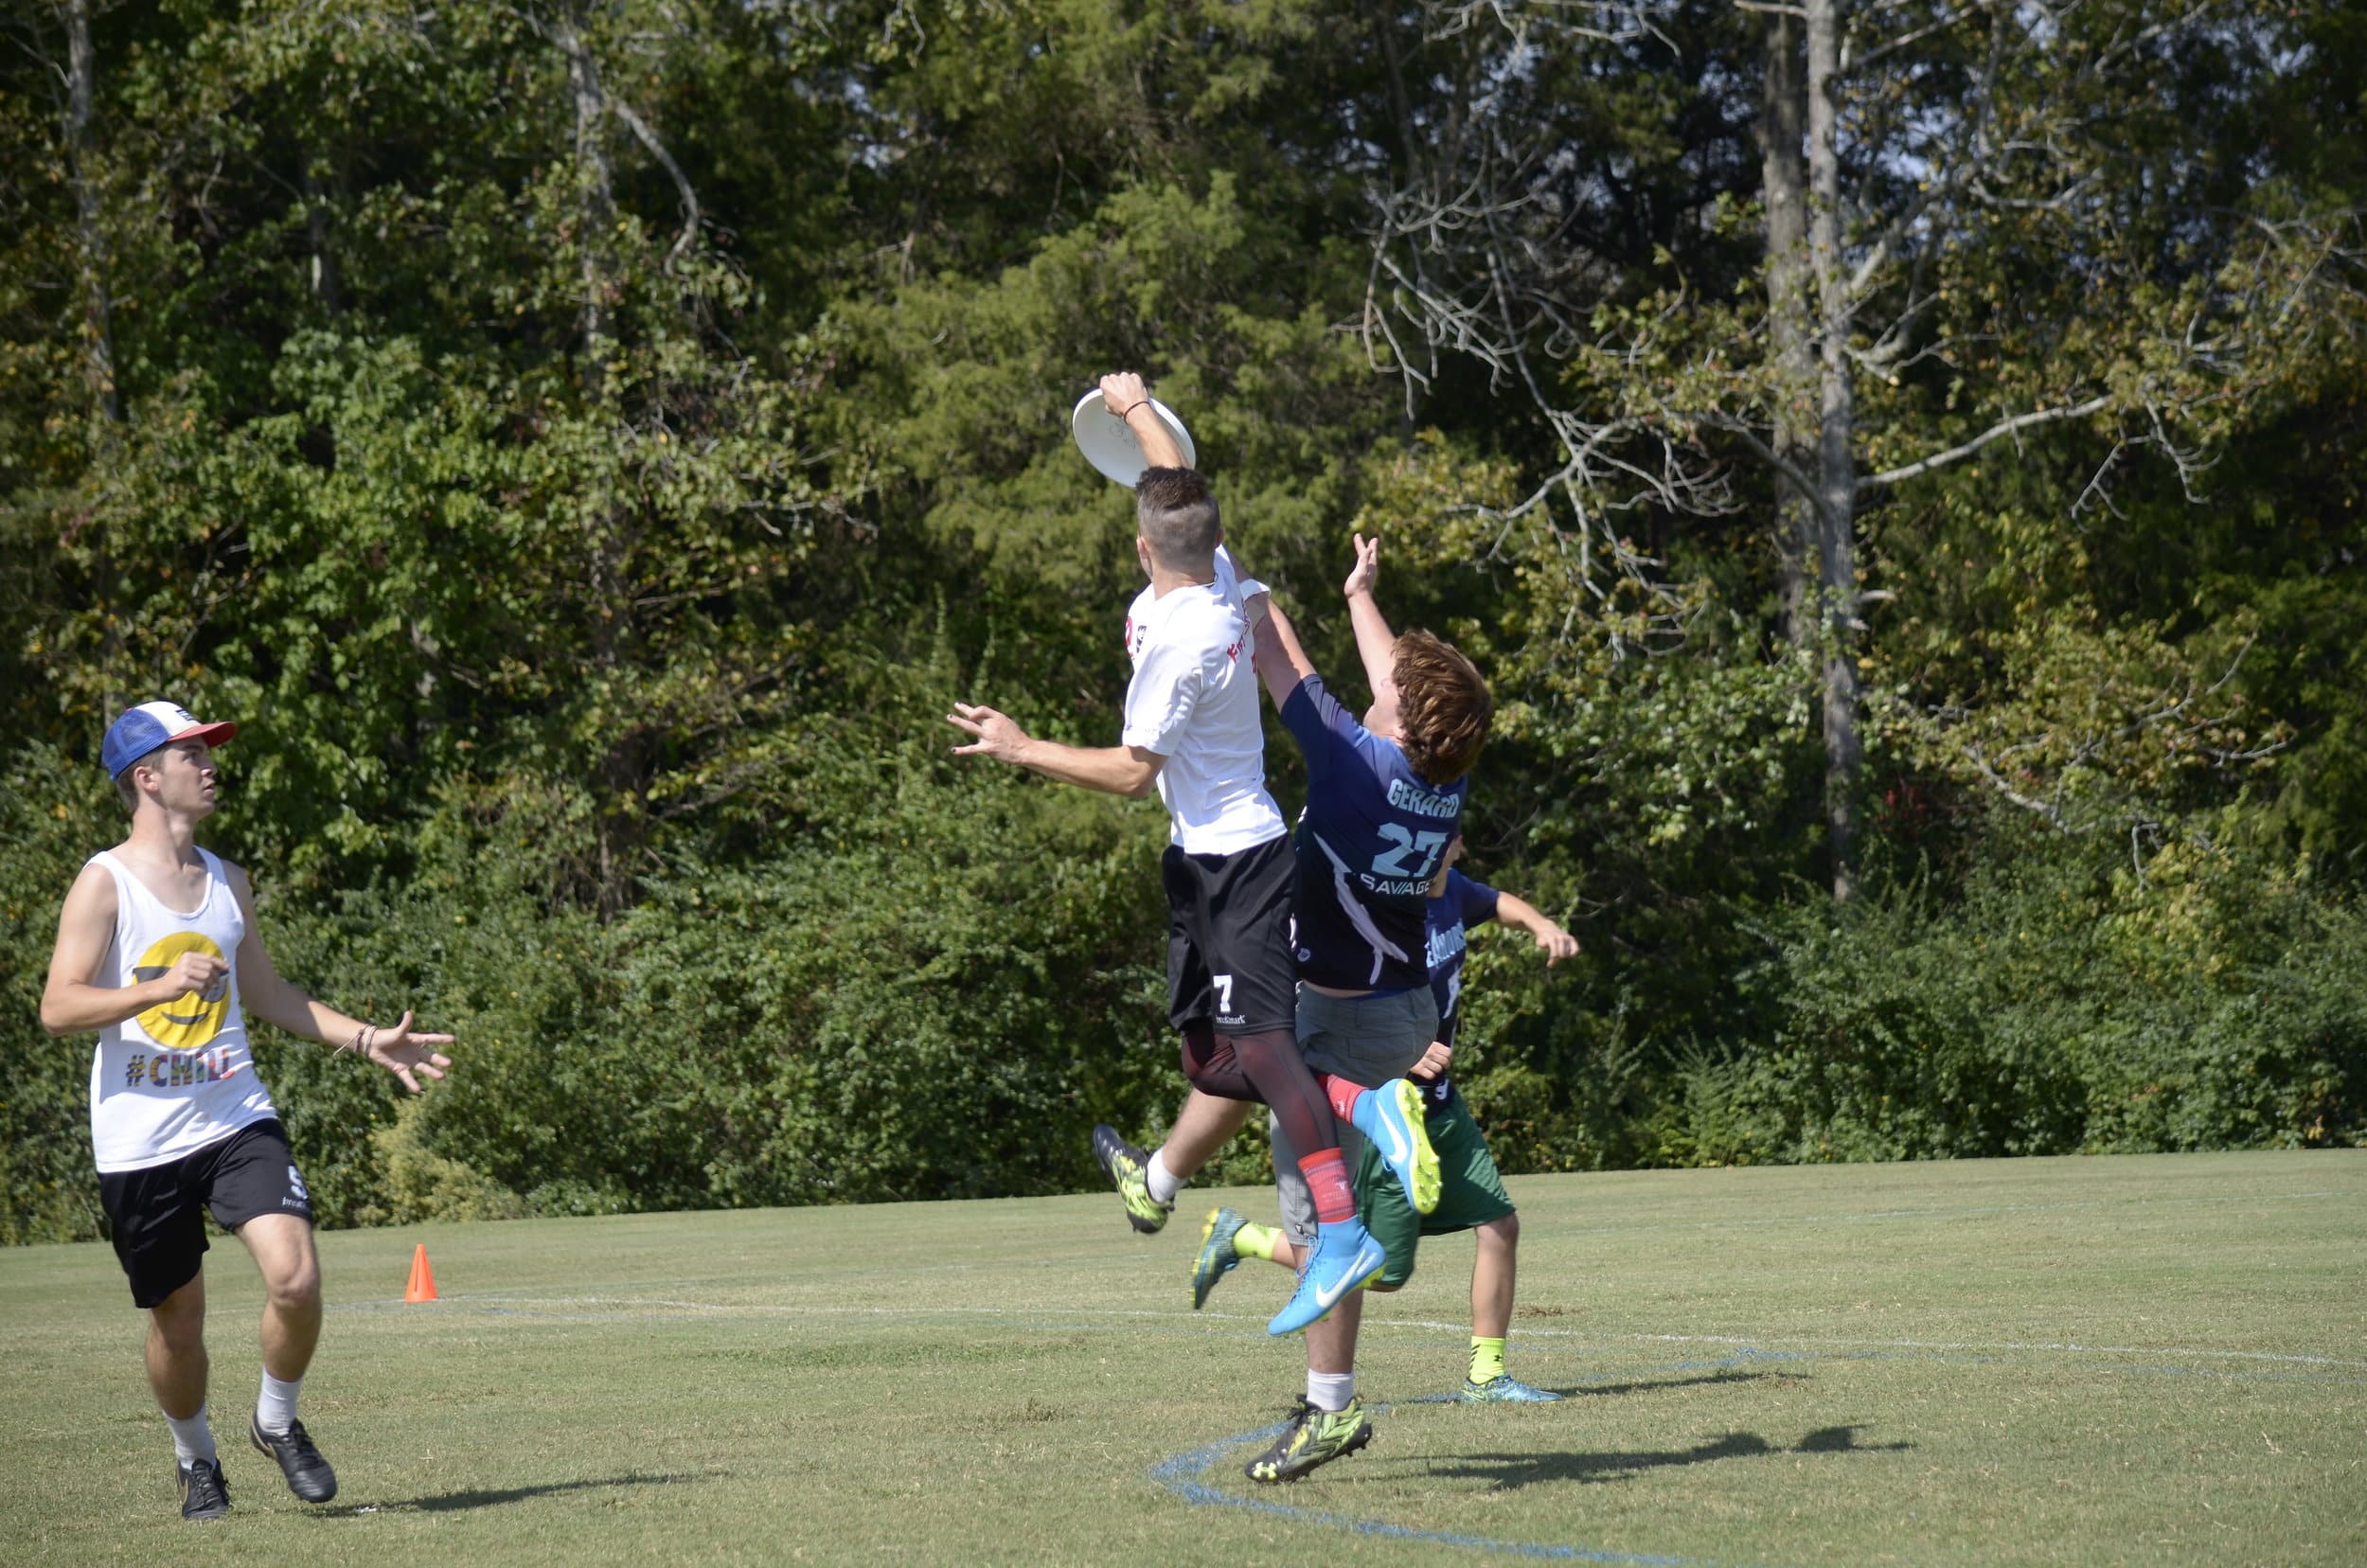 Grayson Holliday catches the disc in the air against William and Mary.